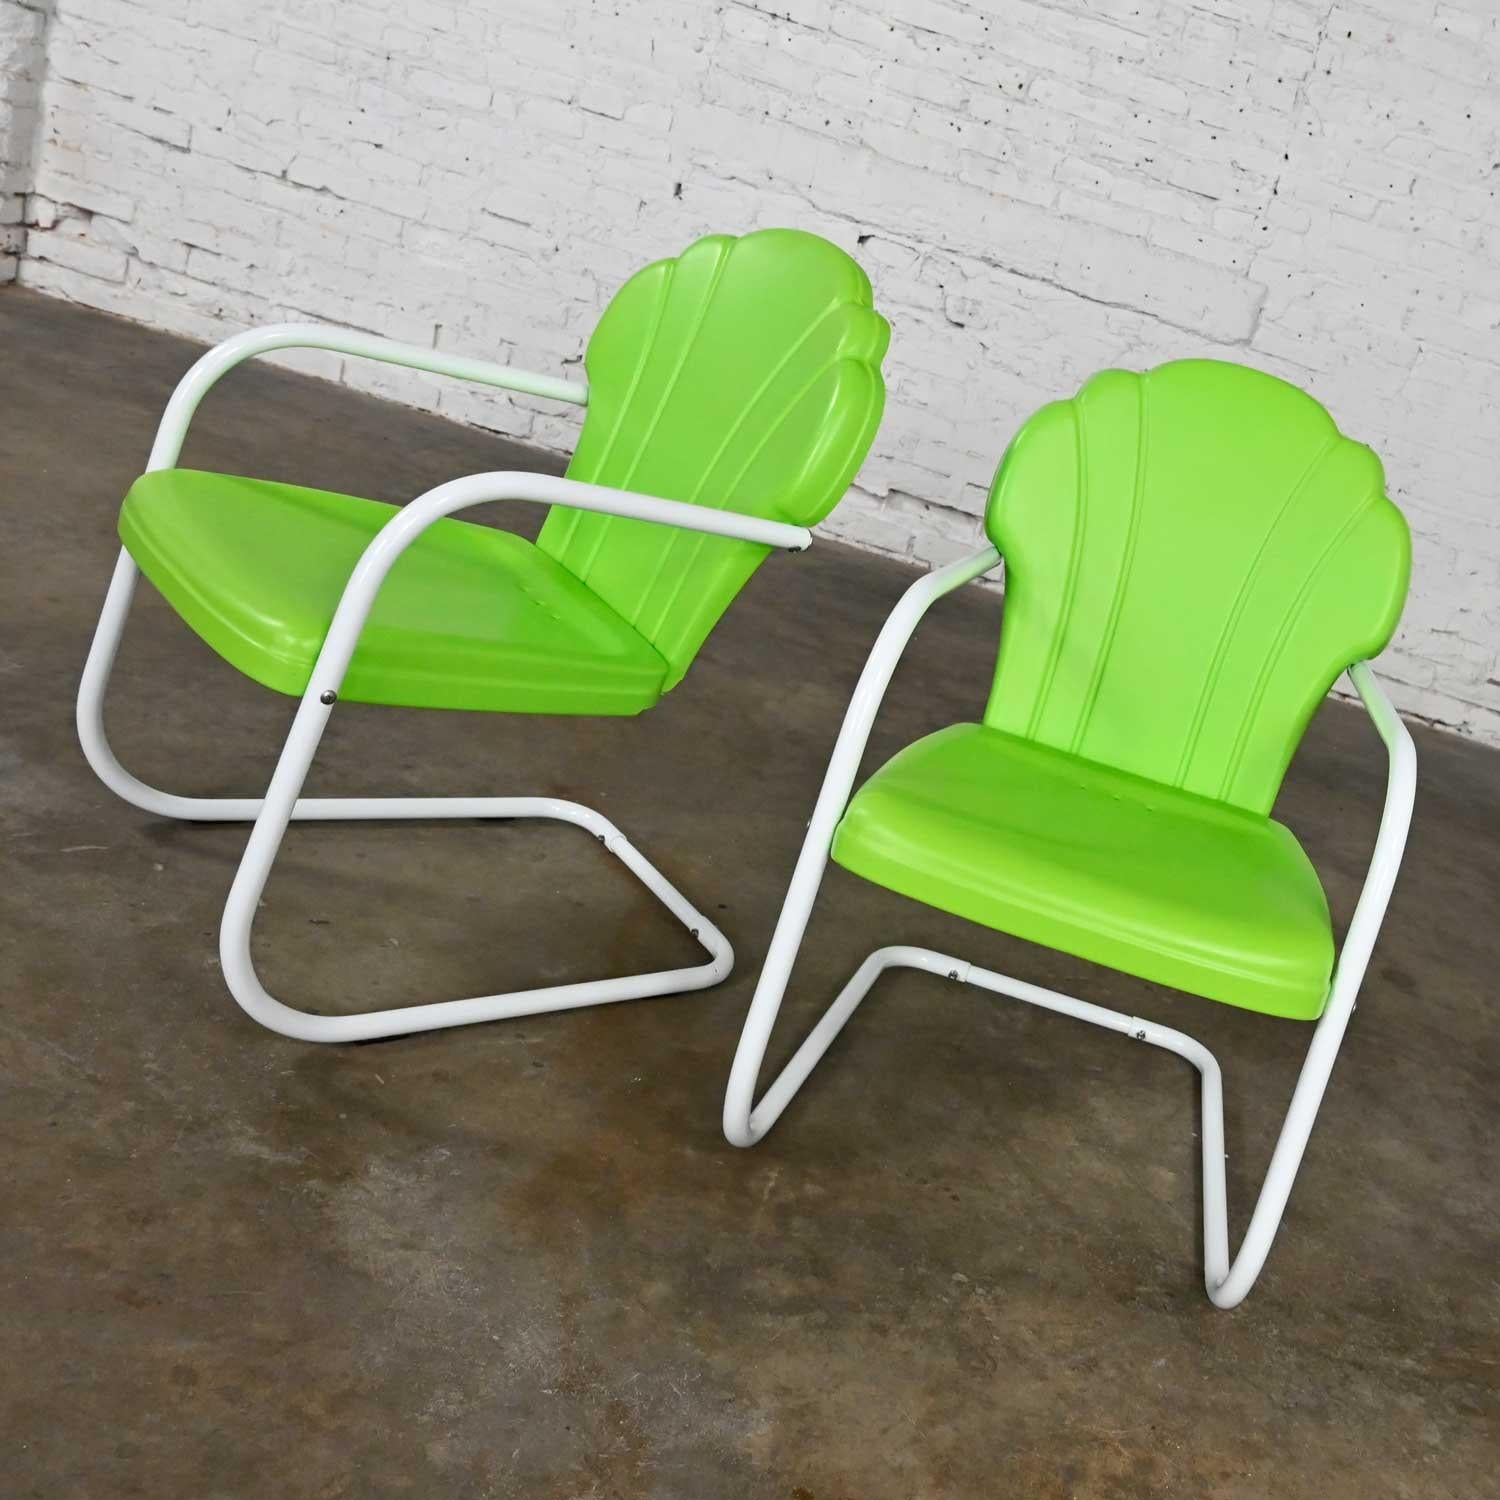 Pair Mid-Century Modern Green & White Metal Outdoor Cantilever Springer Chairs 1